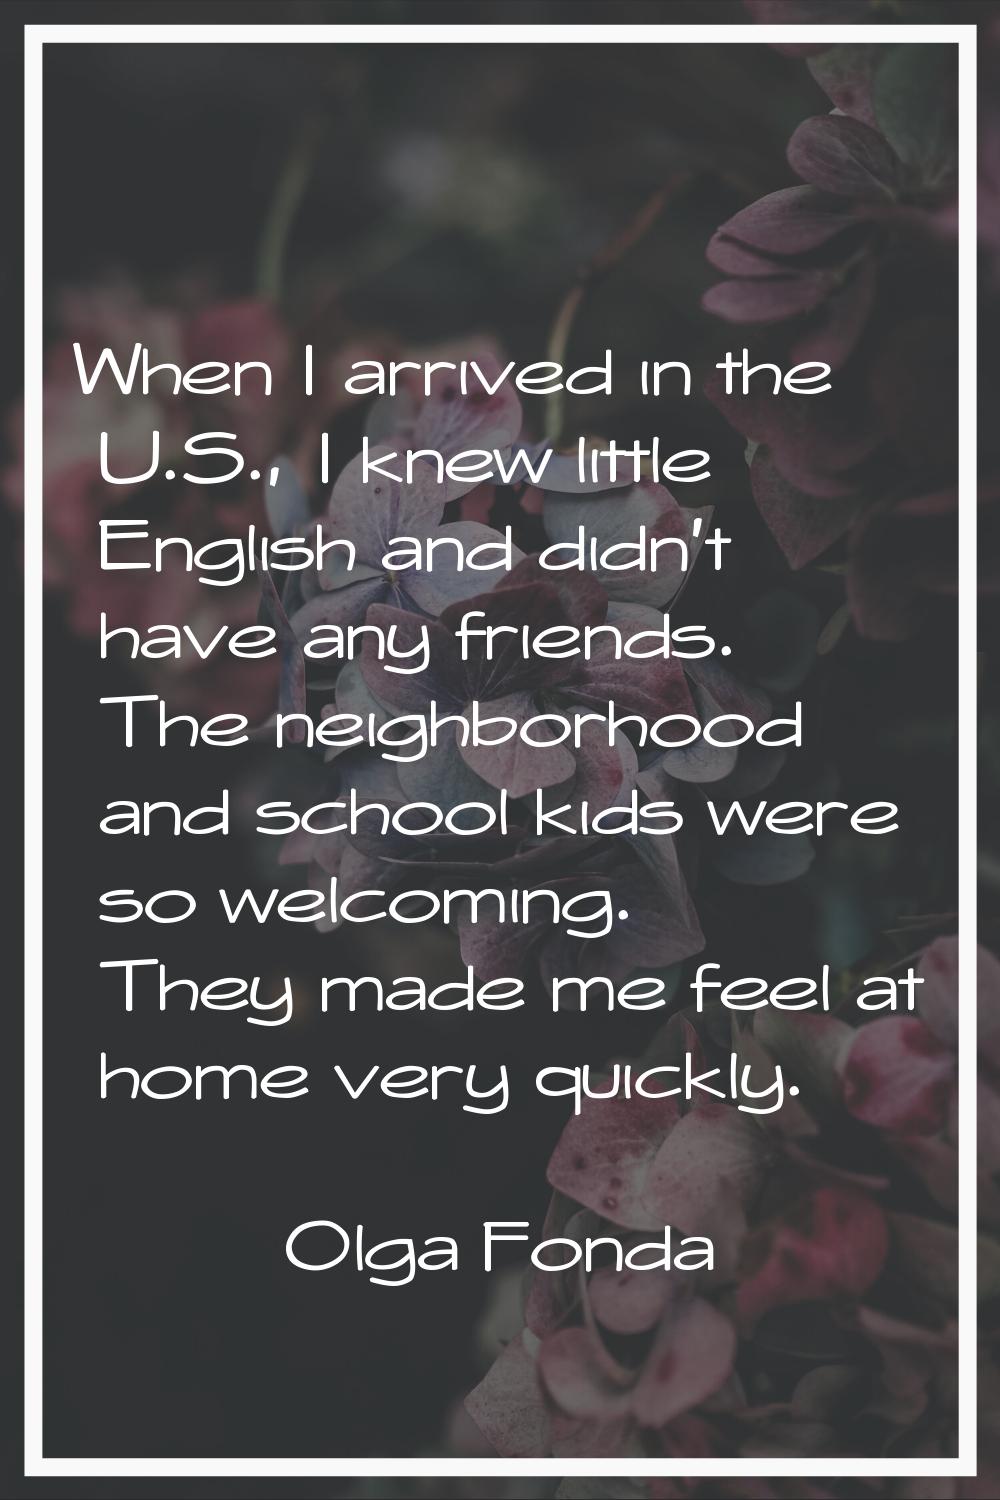 When I arrived in the U.S., I knew little English and didn't have any friends. The neighborhood and